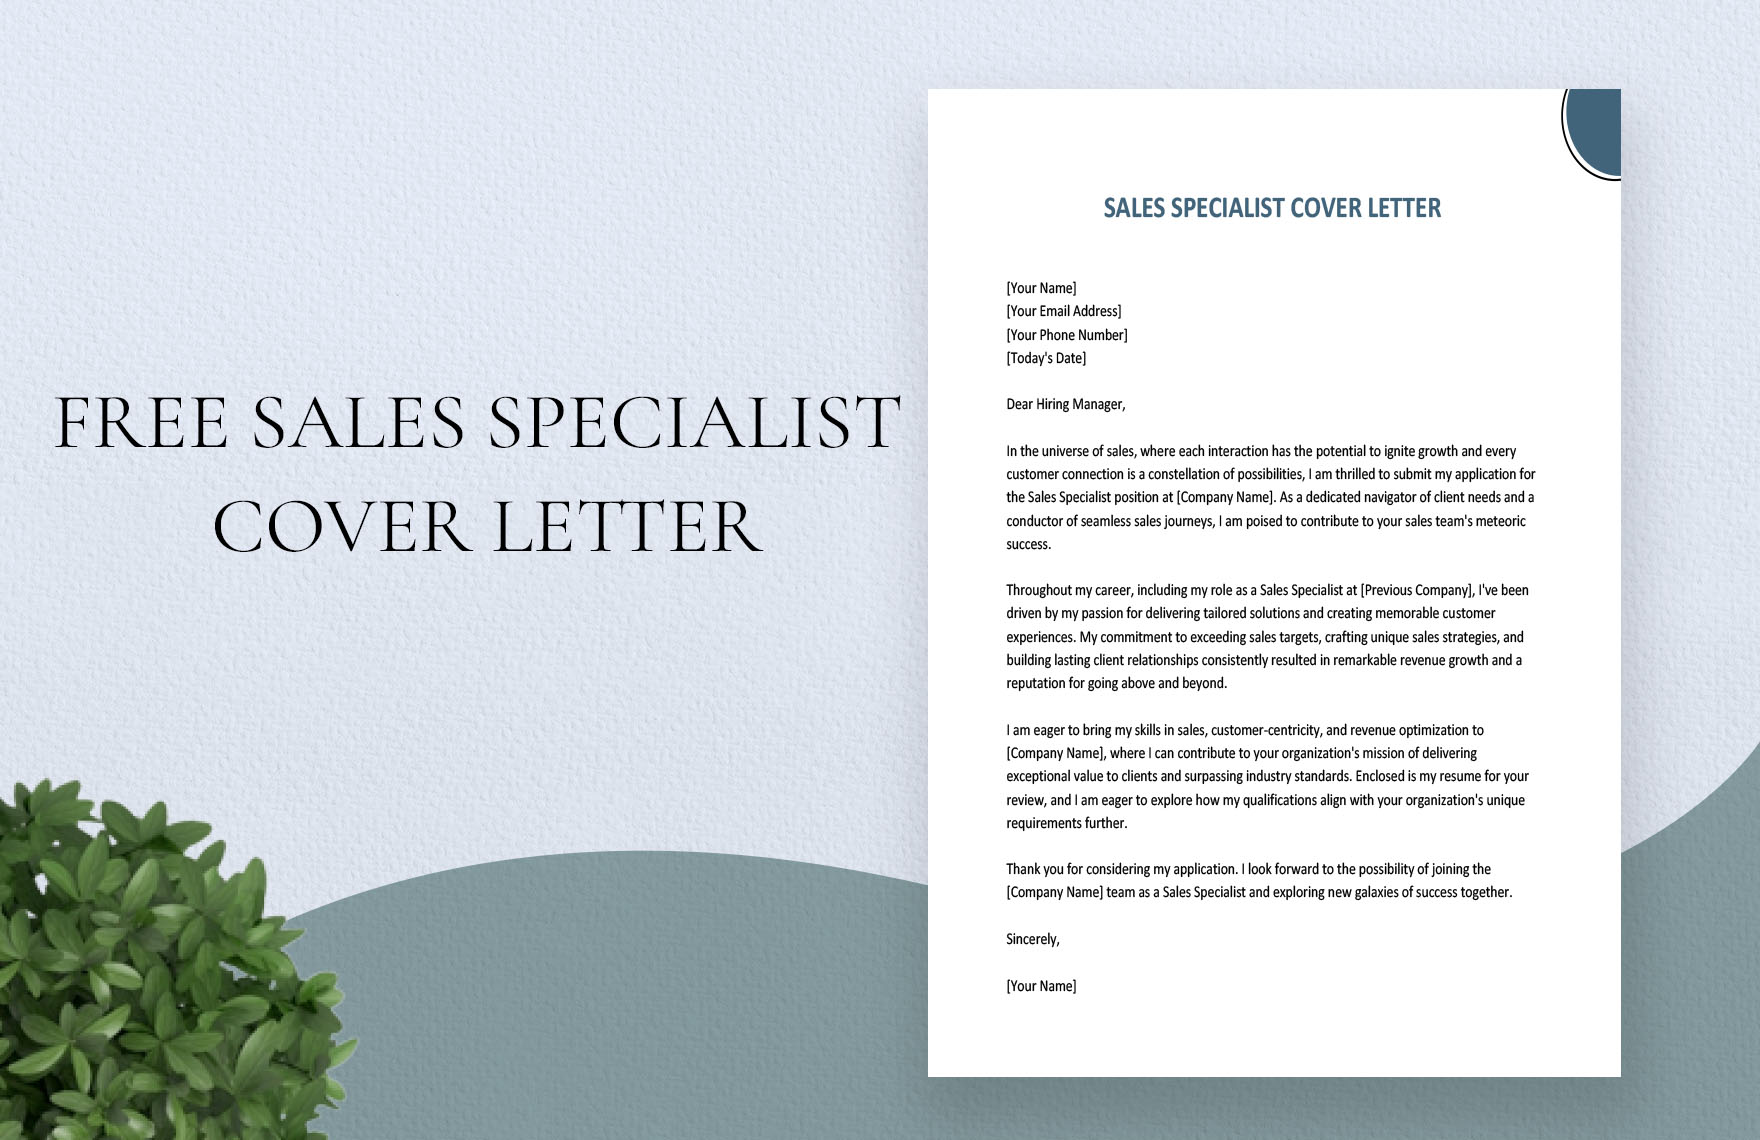 Sales Specialist Cover Letter in Word, Google Docs